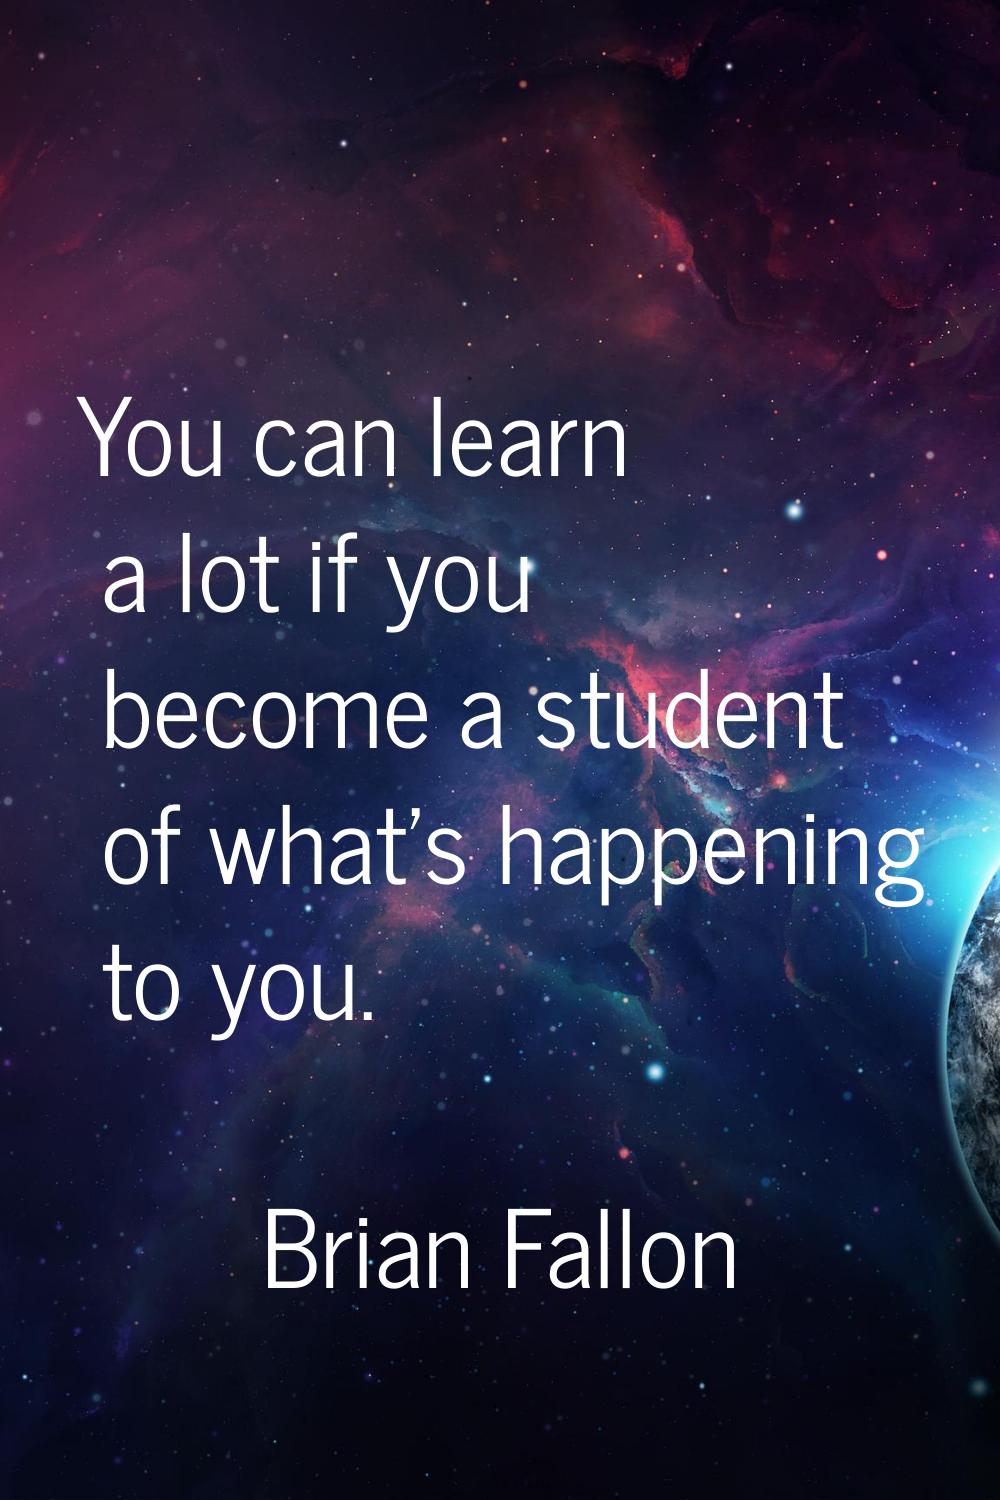 You can learn a lot if you become a student of what's happening to you.